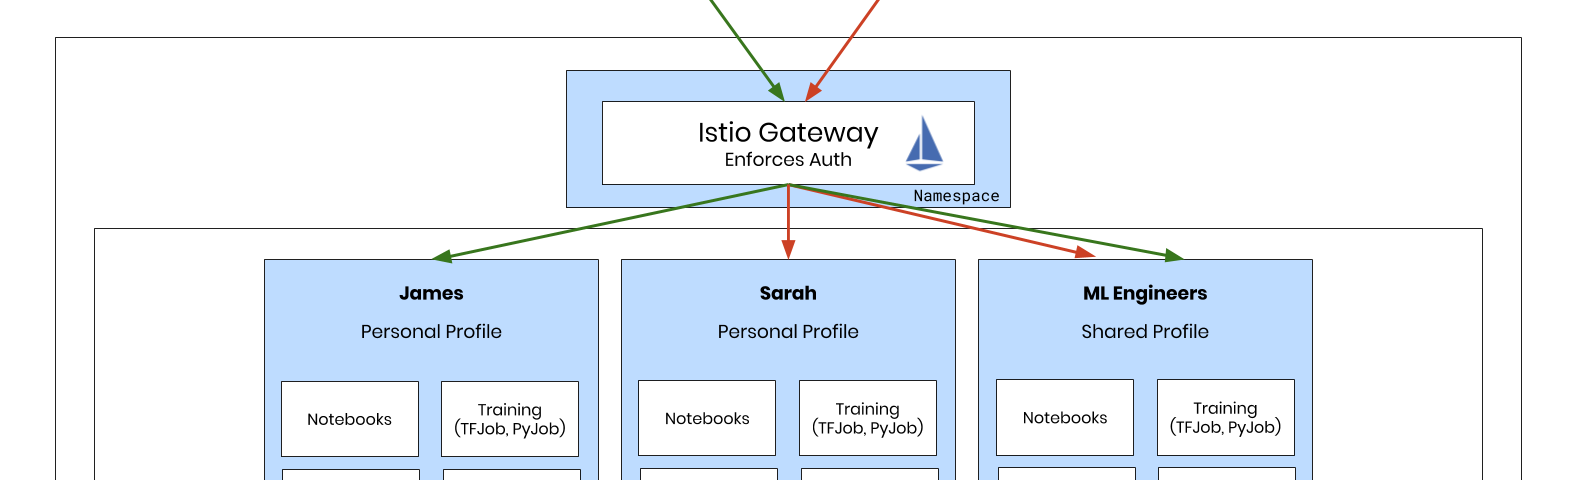 Overview of Istio Gateway